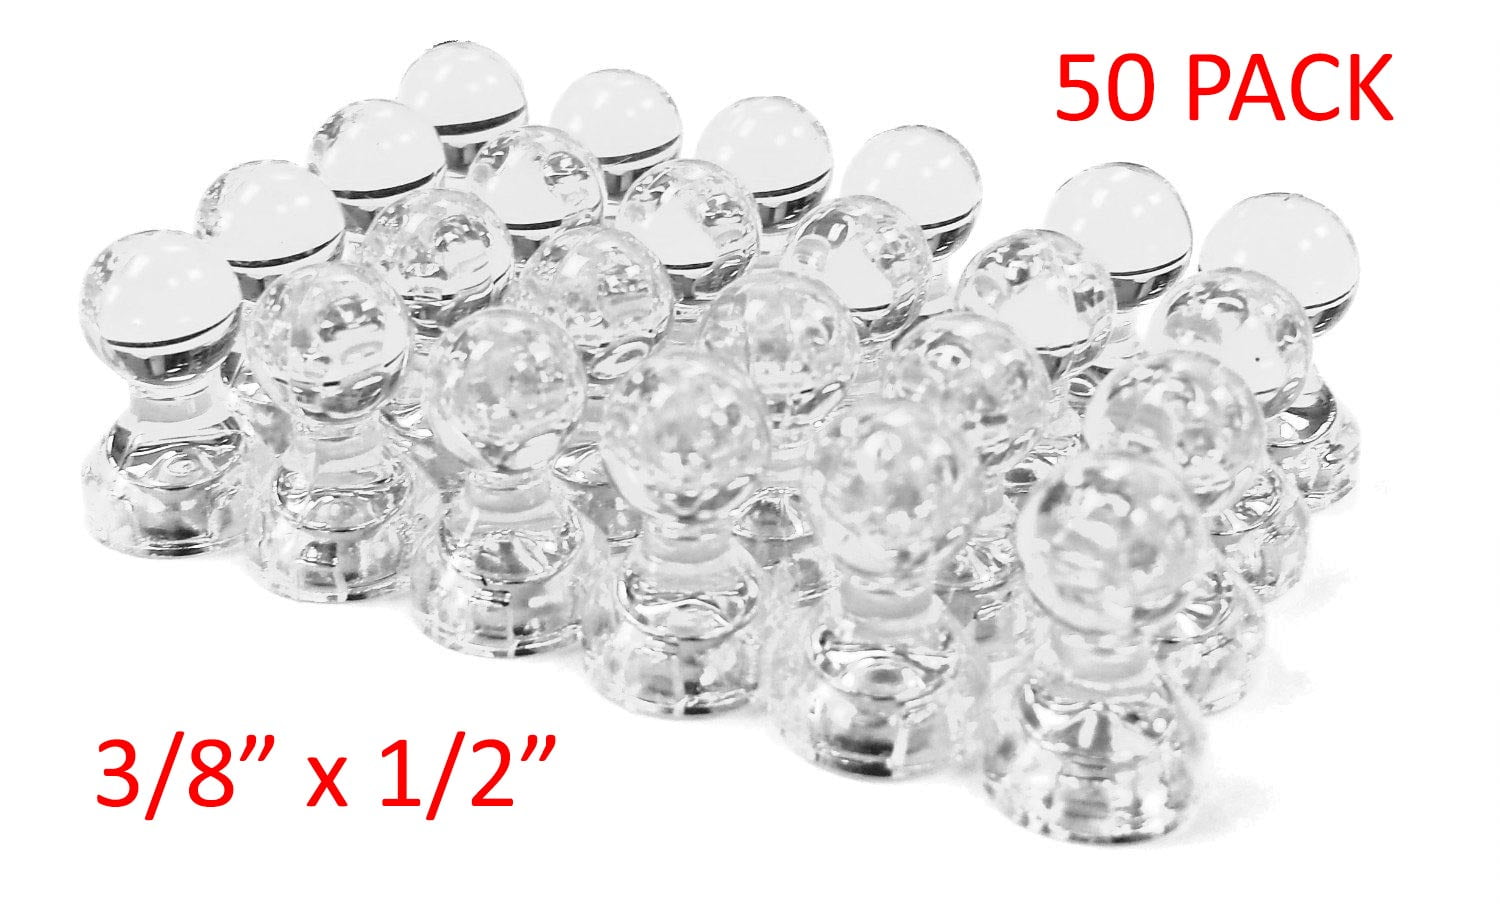 refrigerator magnets US SELLER 3/8" x 1/2" CLEAR whiteboard 100pk push pin 